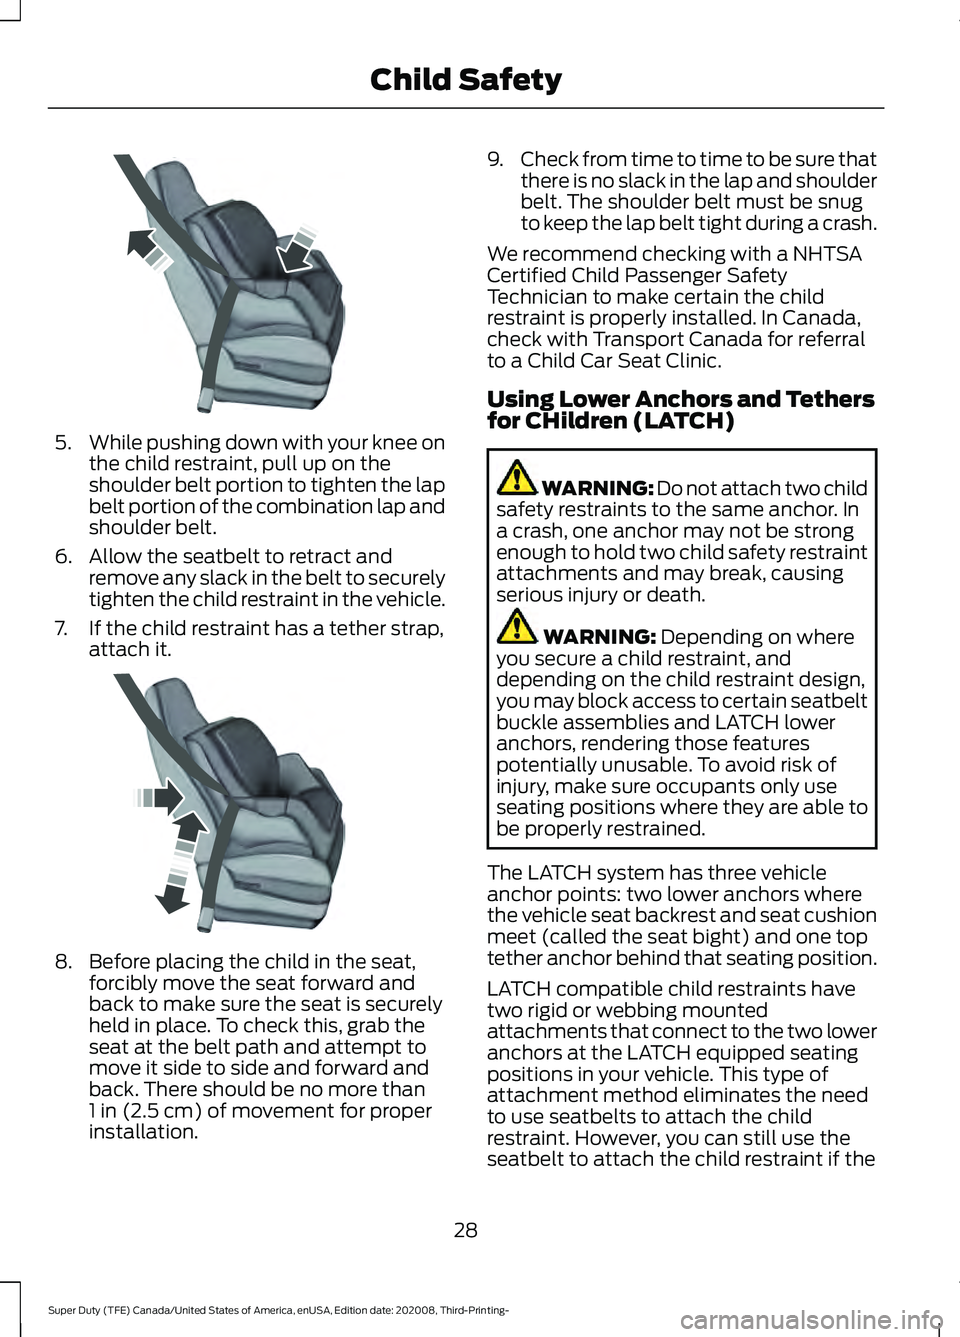 FORD F-450 2021  Owners Manual 5.
While pushing down with your knee on
the child restraint, pull up on the
shoulder belt portion to tighten the lap
belt portion of the combination lap and
shoulder belt.
6. Allow the seatbelt to ret